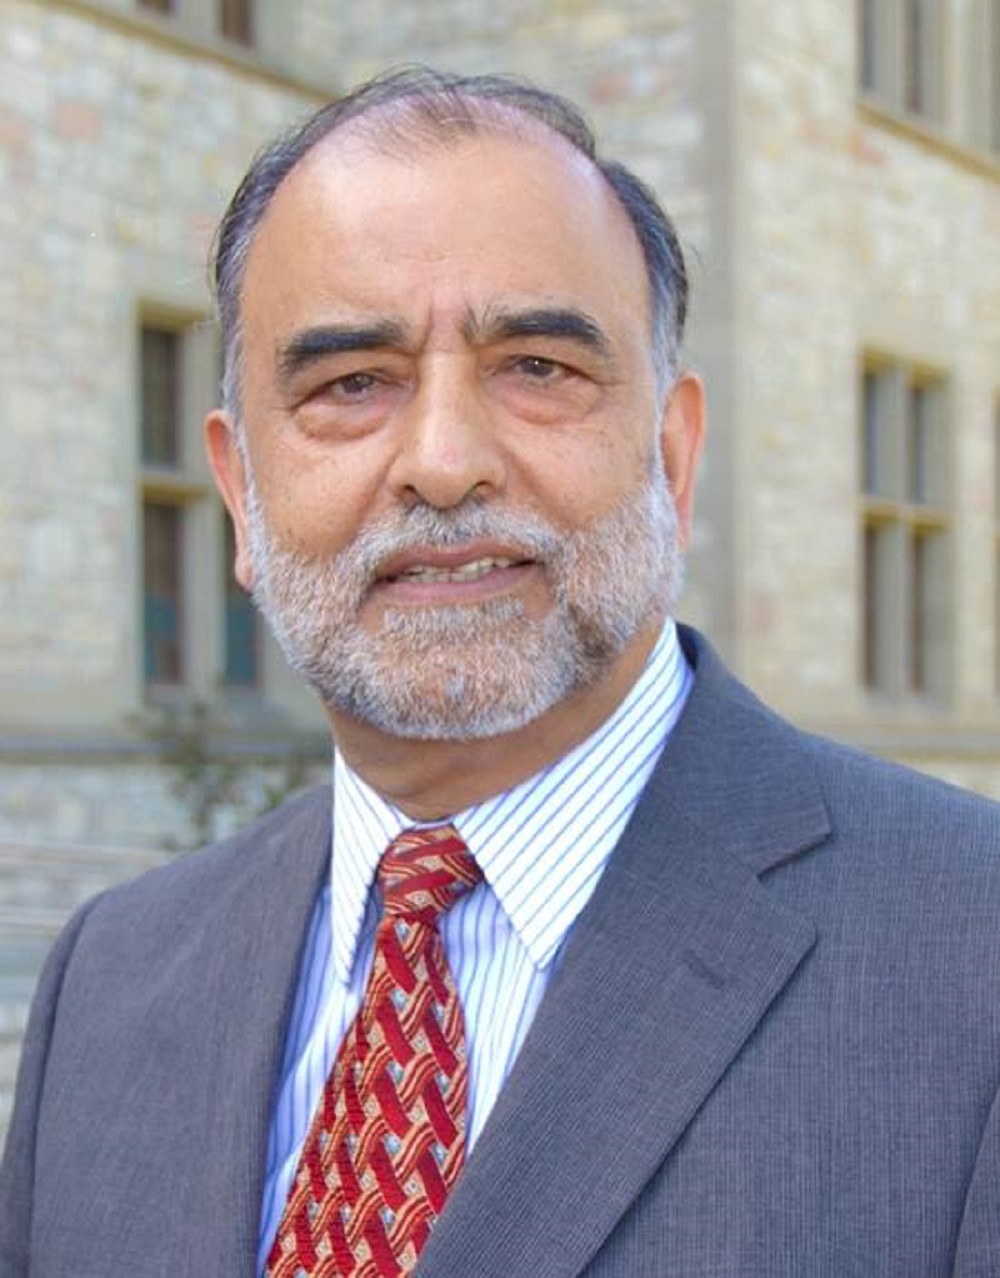 Alumnus Dr. Jawahar (Jay) Kalra is this year’s recipient of the Outstanding Community Service Award.